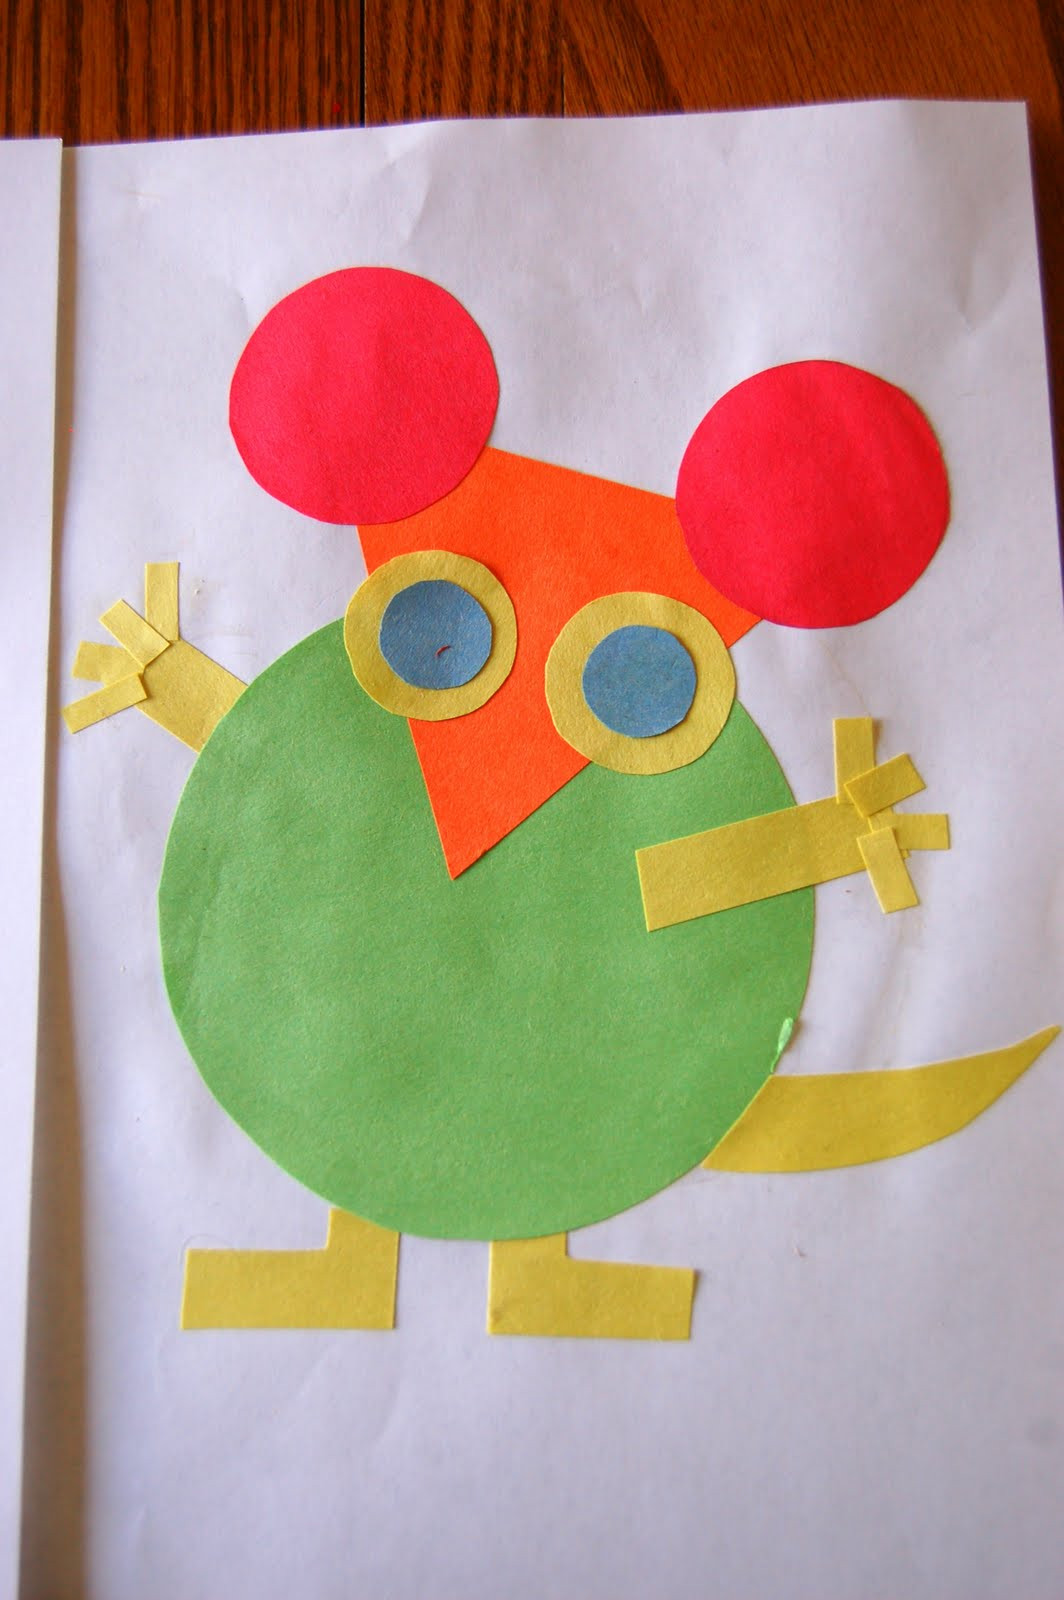 Art And Craft For Preschool
 "Mouse Shapes" She s Crafty